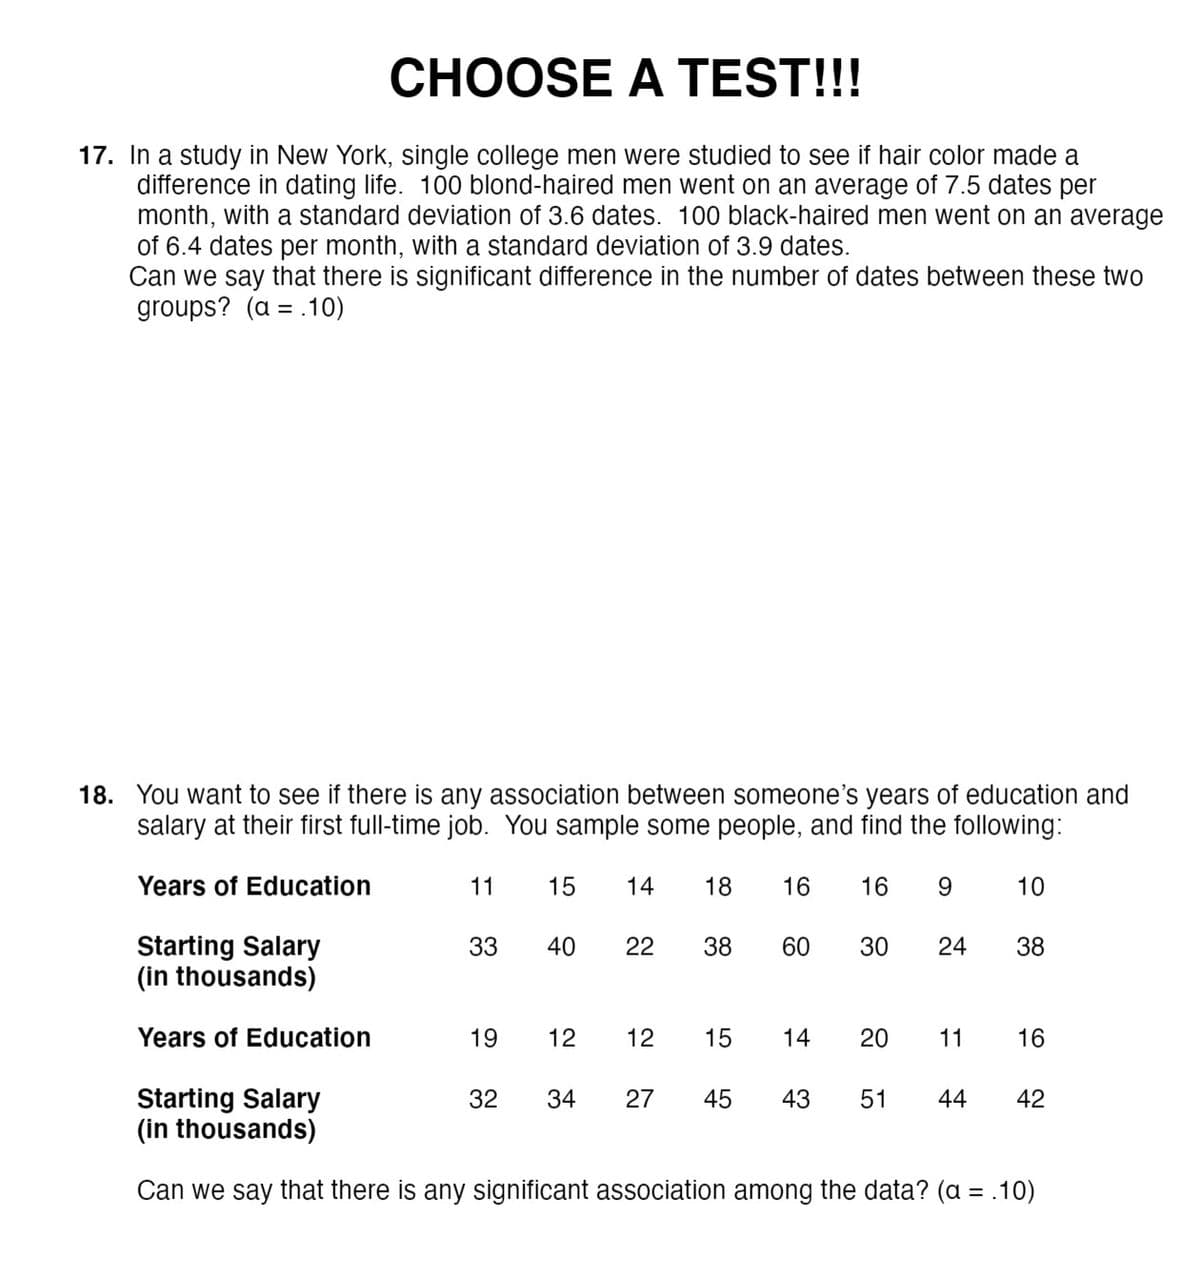 CHOOSE A TEST!!!
17. In a study in New York, single college men were studied to see if hair color made a
difference in dating life. 100 blond-haired men went on an average of 7.5 dates per
month, with a standard deviation of 3.6 dates. 100 black-haired men went on an average
of 6.4 dates per month, with a standard deviation of 3.9 dates.
Can we say that there is significant difference in the number of dates between these two
groups? (a = .10)
18. You want to see if there is any association between someone's years of education and
salary at their first full-time job. You sample some people, and find the following:
Years of Education
11
15
14
18
16
16
9
10
22
Starting Salary
(in thousands)
33
40
38
60
30
24
38
Years of Education
19
12
12
15
14
20
11
16
Starting Salary
(in thousands)
32
34
27
45
43
51
44
42
Can we say that there is any significant association among the data? (a = .10)
